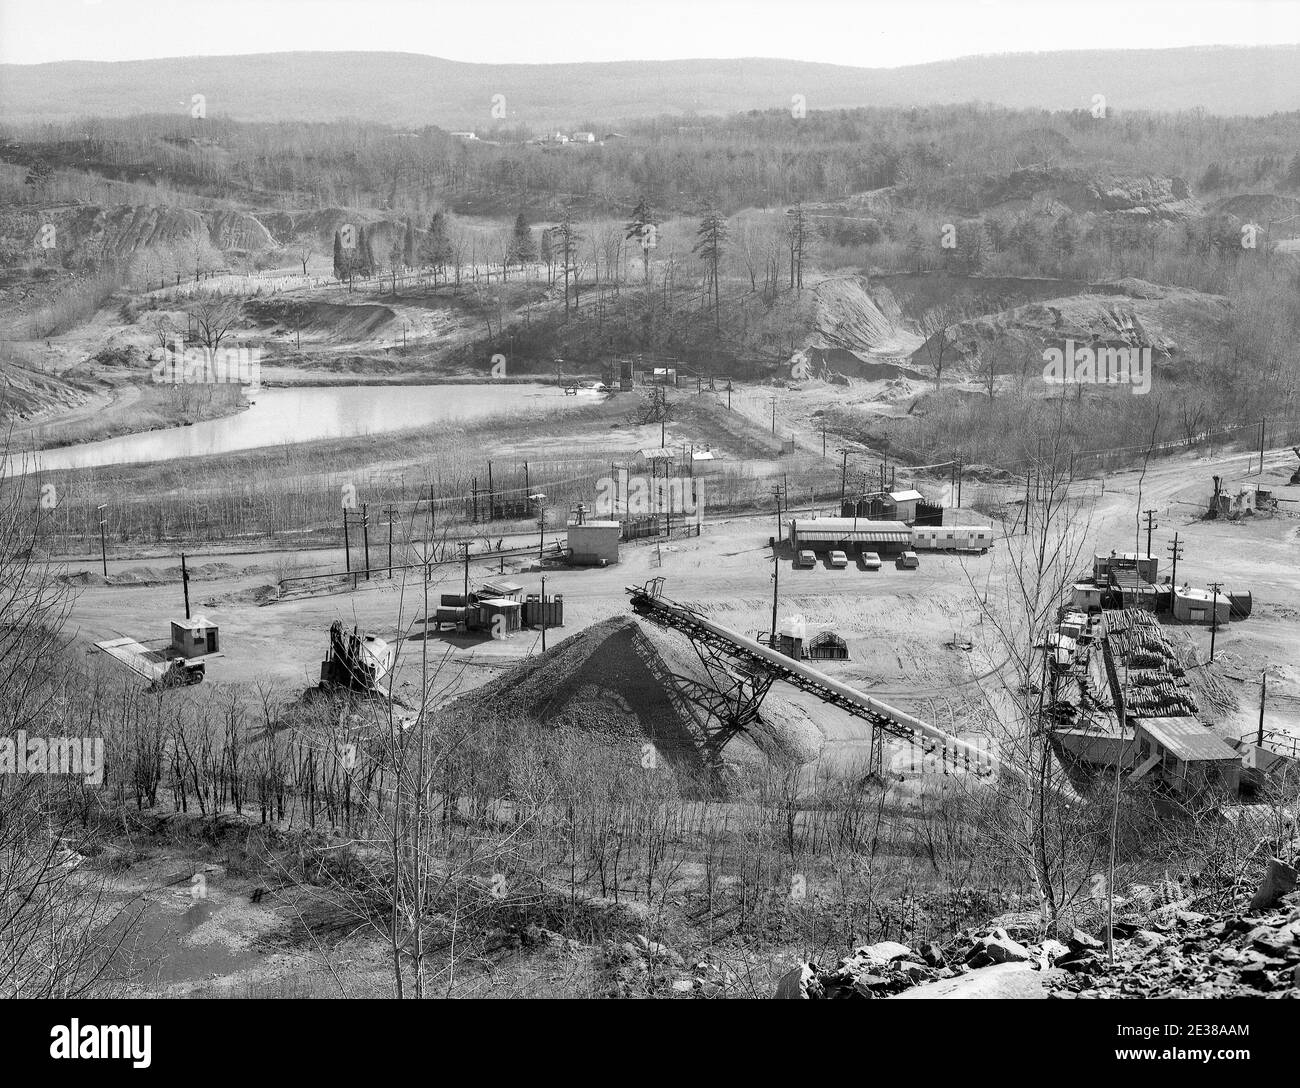 Glen-Nan Coal Company operation at the Forge Slope ended on February 24  1 pm Sunday Last pile of anthracite coal mined at the Forge Slope 1974 is seen here. This is generally considered the end of Deep coal mining in Luzerne County Pennsylvania USA . Stock Photo